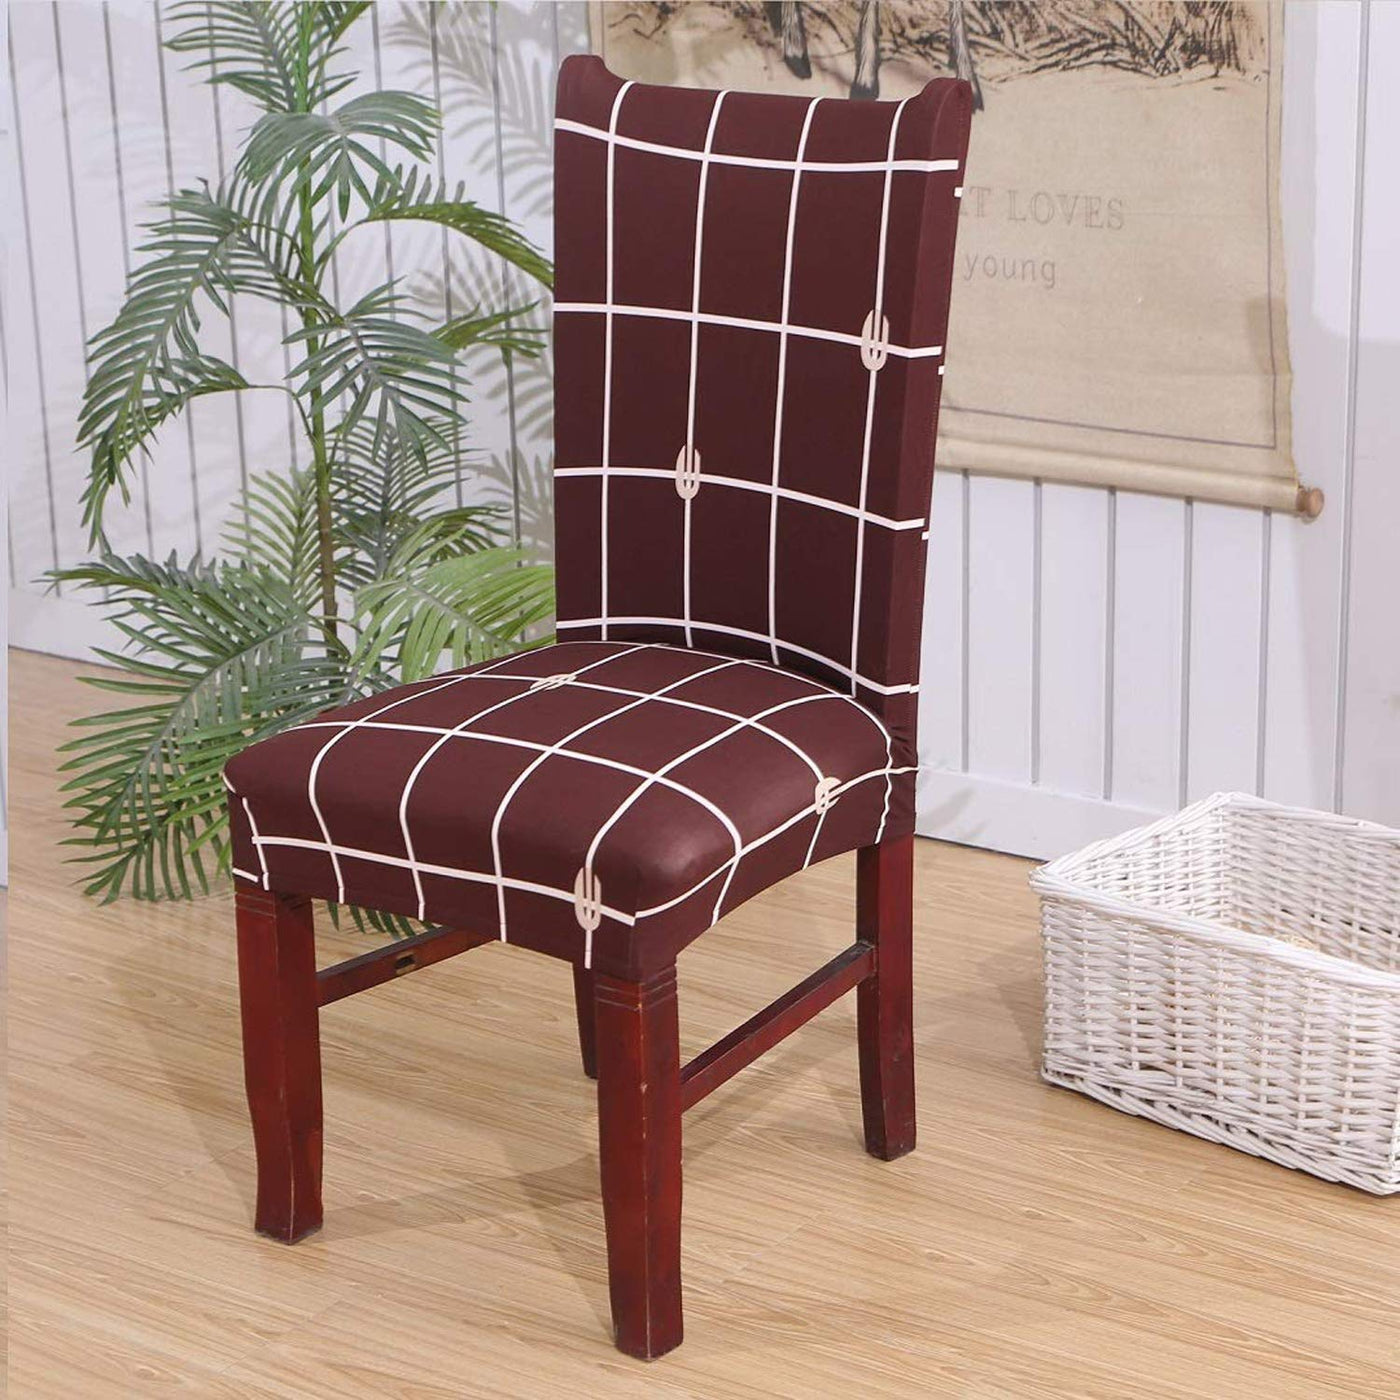 Printed Elastic Chair Cover - Brown Check